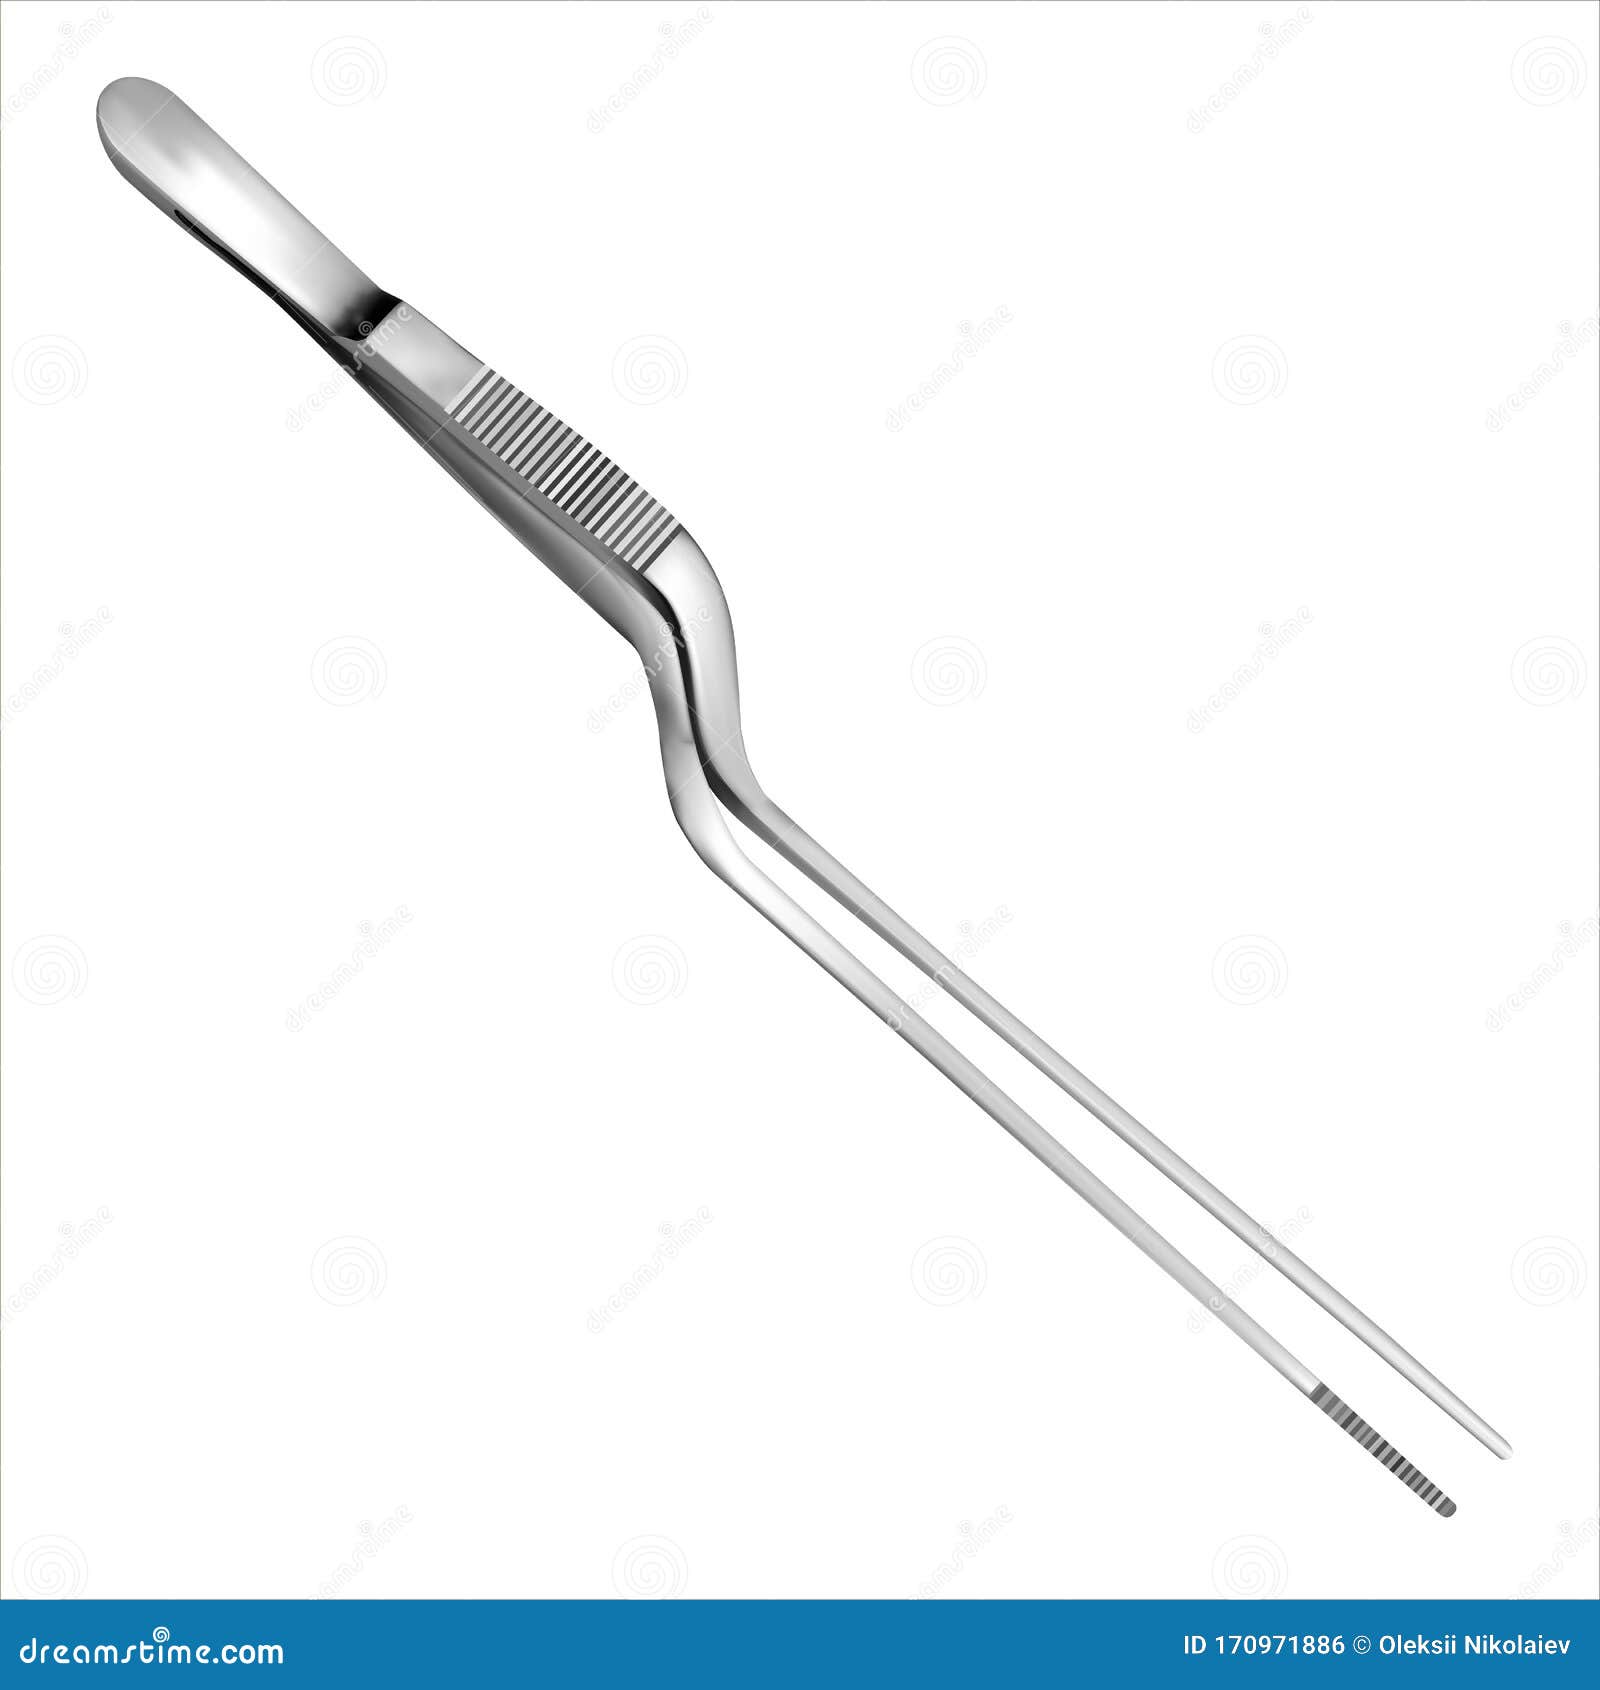 Set of tweezers. Long serrated angled tweezers, anatomical forceps, dental  straight surgical pincers, curved tweezers, bayonet pincette. Manual  surgical instrument. Isolated objects. Vector, Stock vector